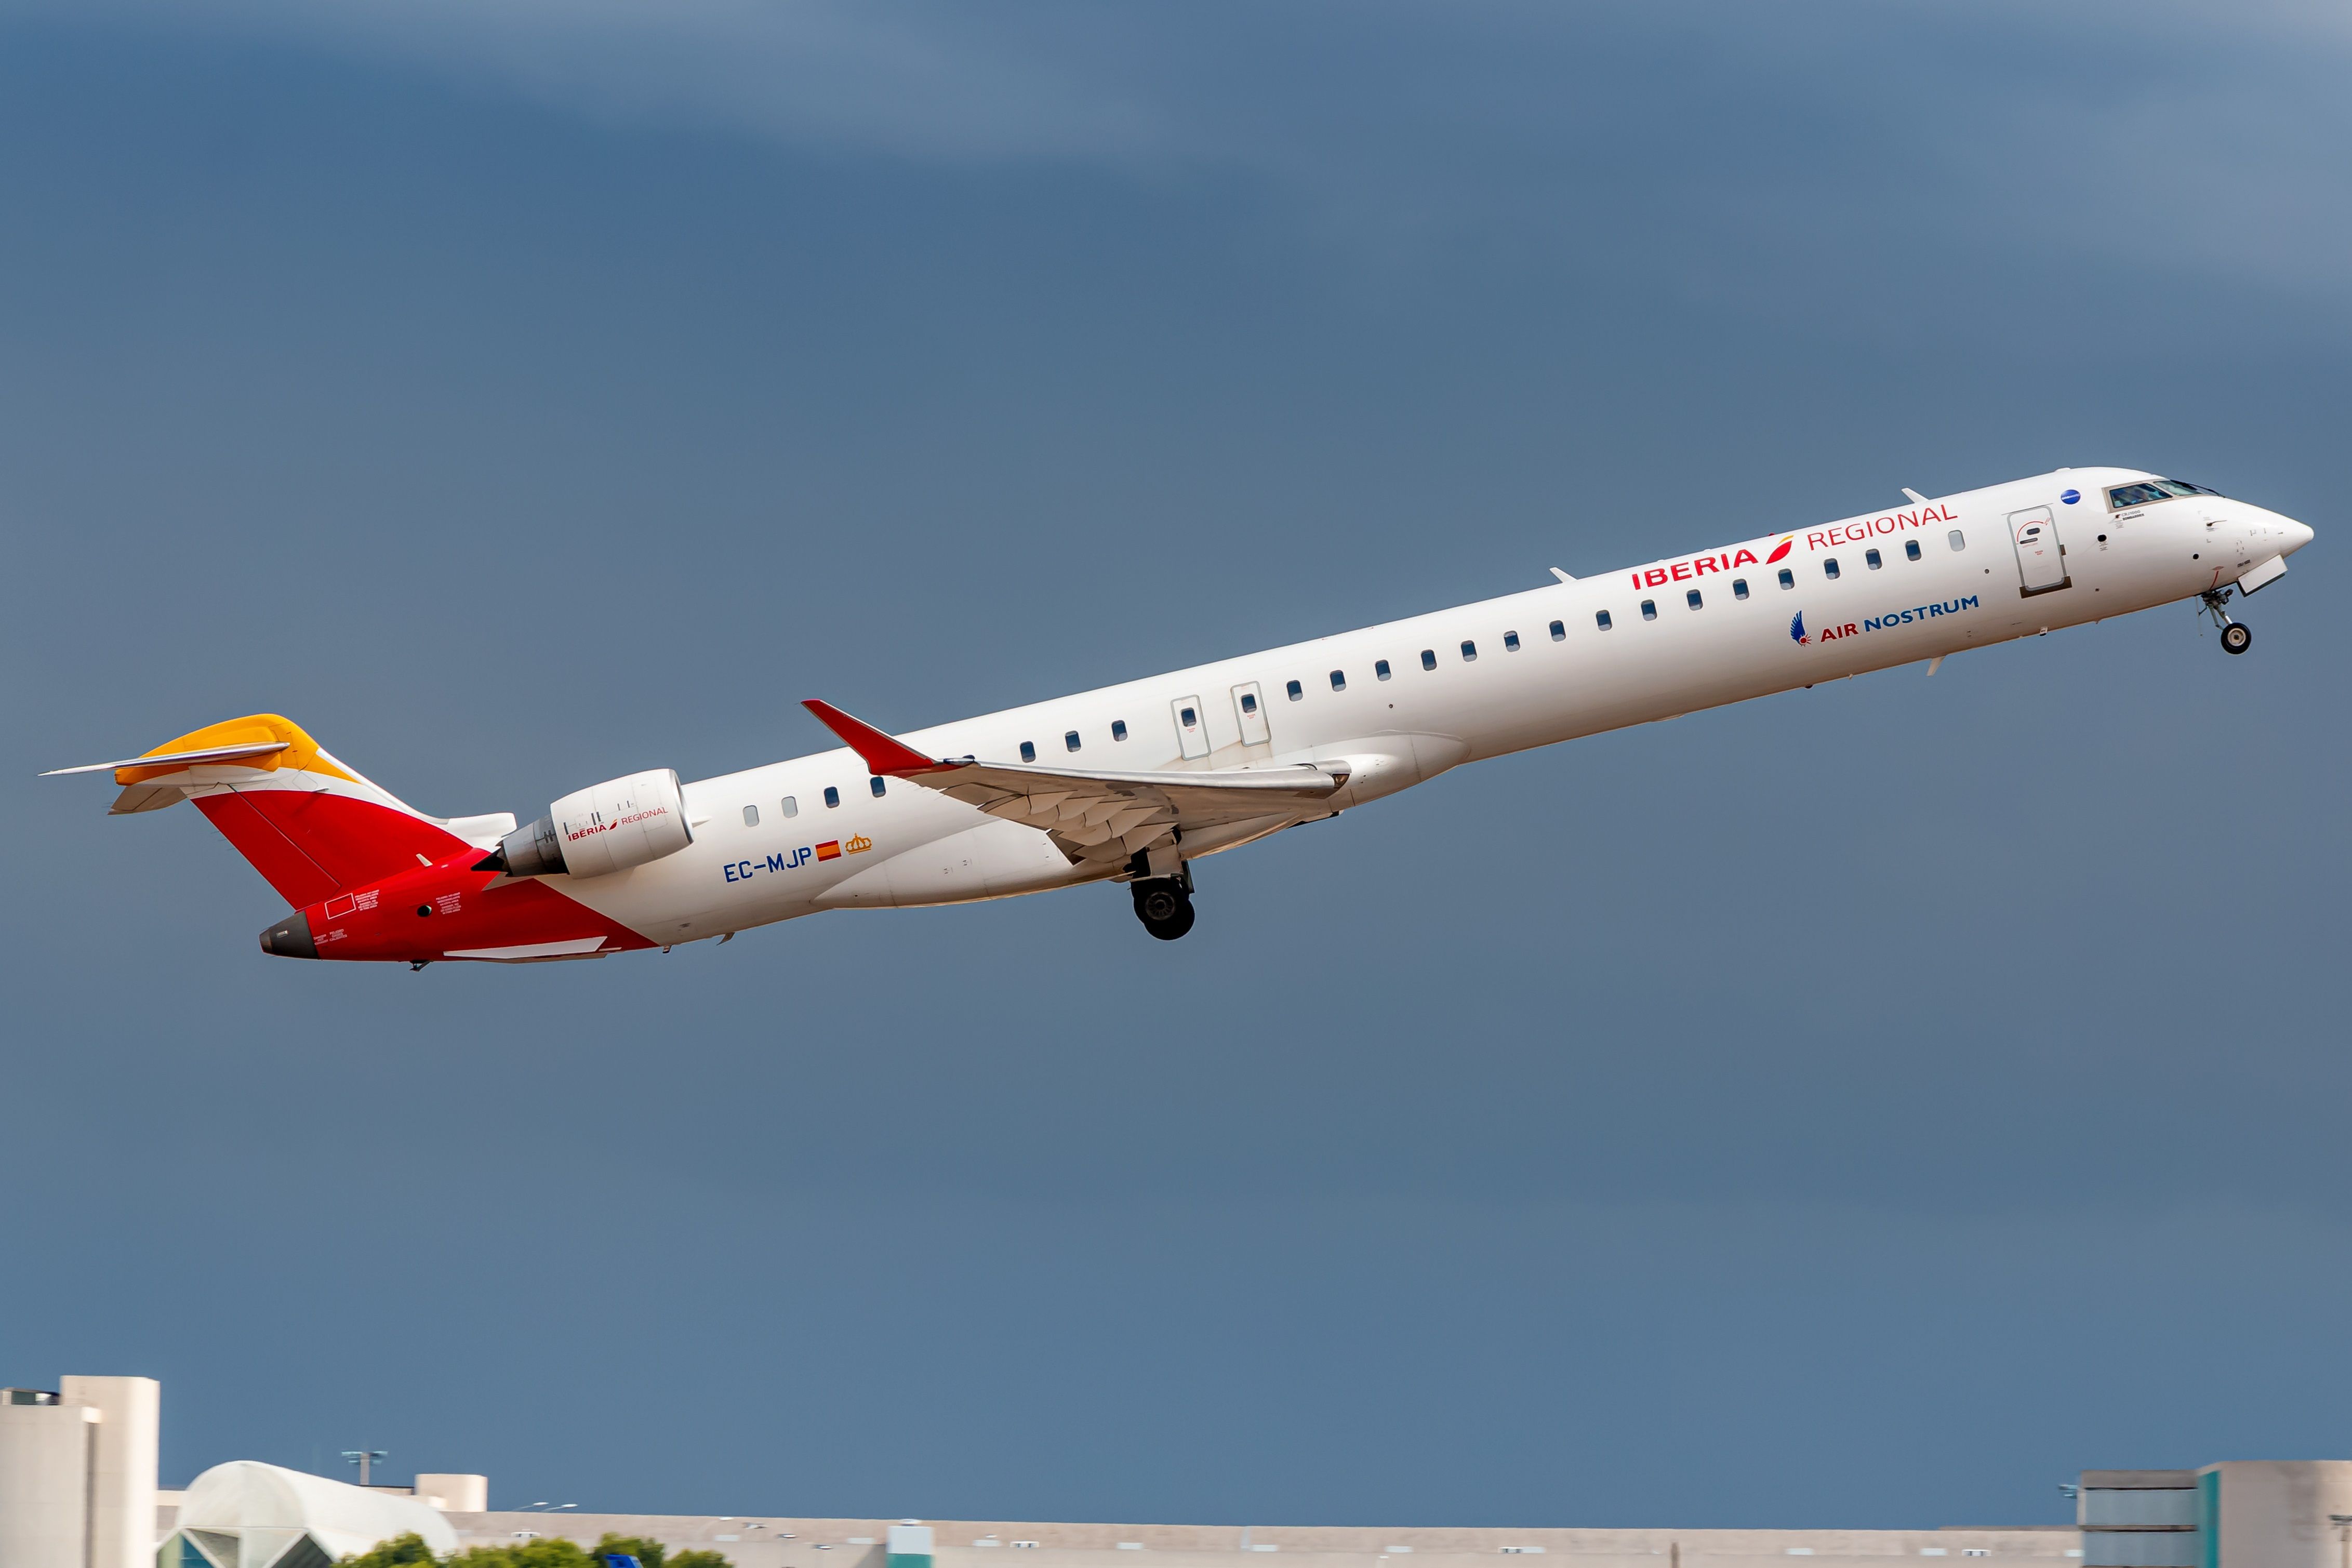 An Air Nostrum CRJ 1000 Flying in the sky.